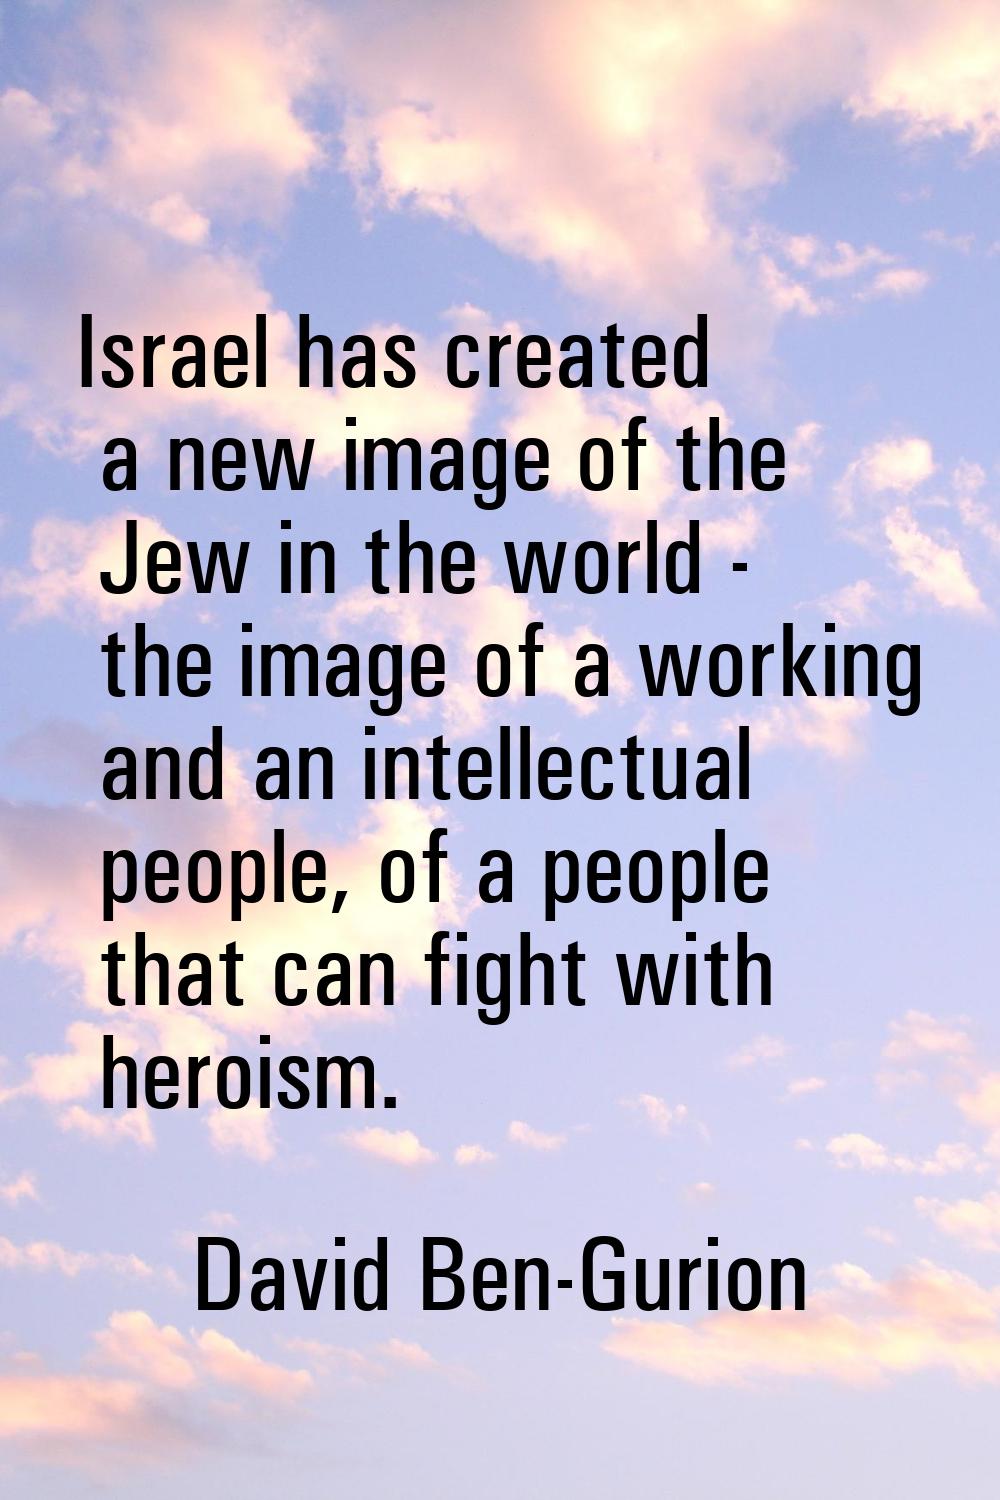 Israel has created a new image of the Jew in the world - the image of a working and an intellectual